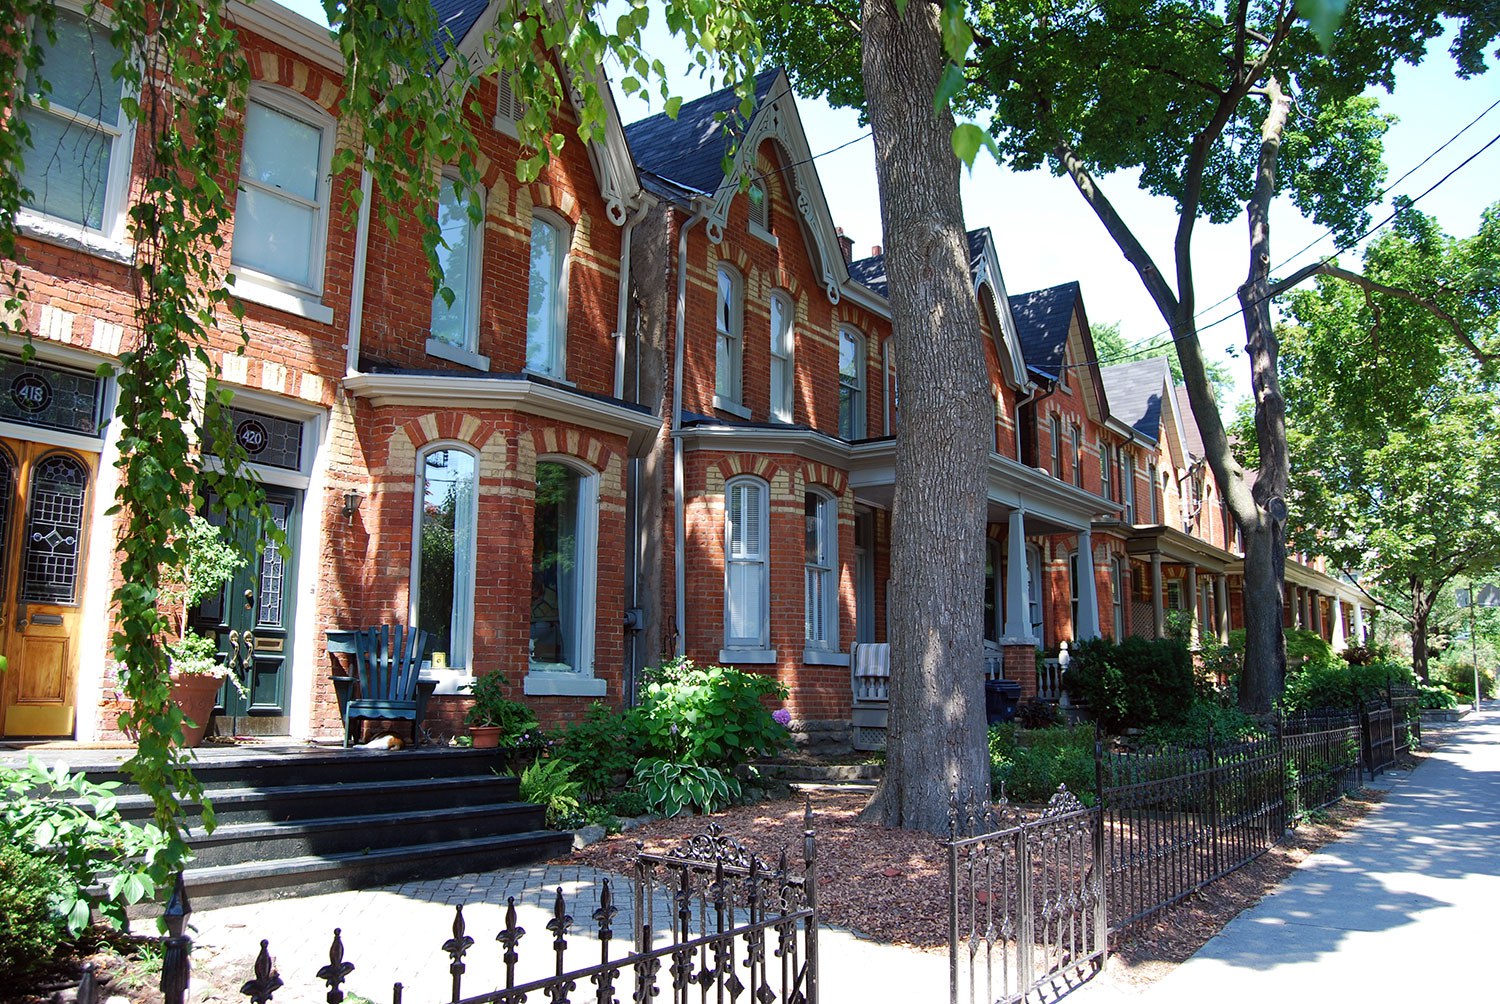 Toronto currently has 20 HCDs in full force – the most in Ontario. This streetscape, shown here, is part of the Yorkville-Hazelton Avenue HCD.